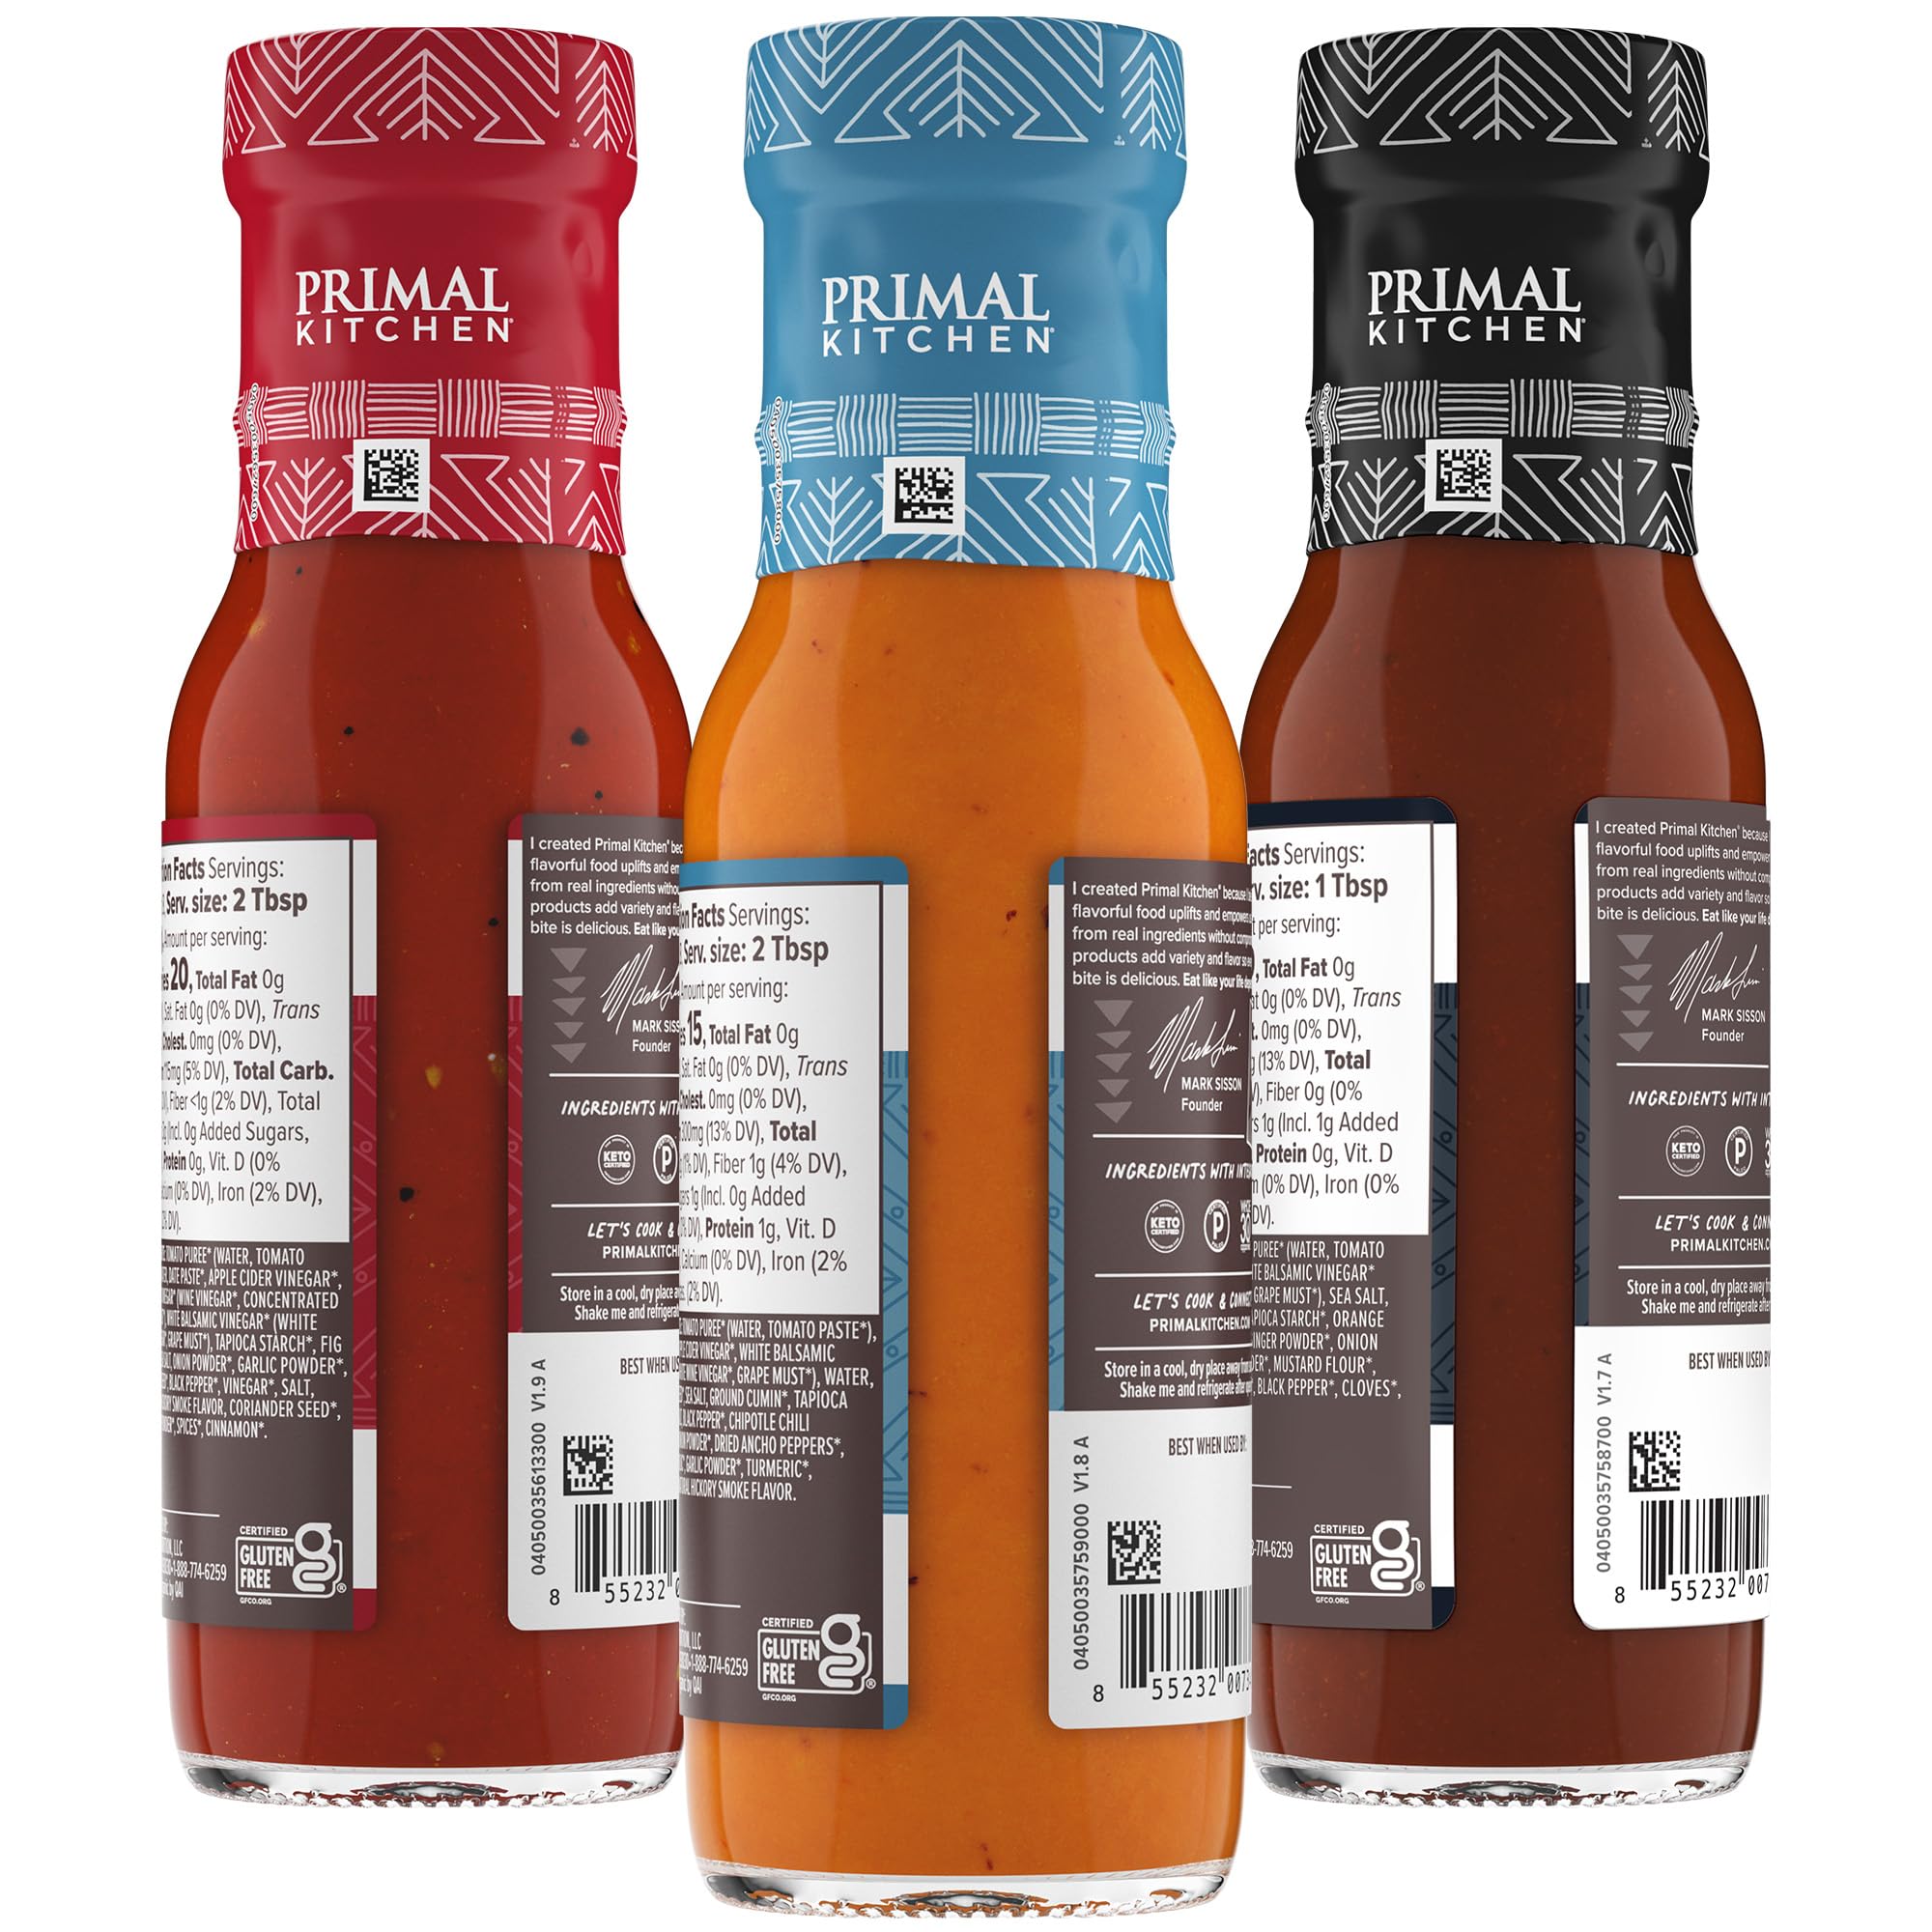 Primal Kitchen Organic BBQ Sauce & Steak Sauce 3-Pack, Made with Real Ingredients, No Cane Sugar or Corn Syrup, Includes Classic BBQ, Golden BBQ, and Steak Sauce